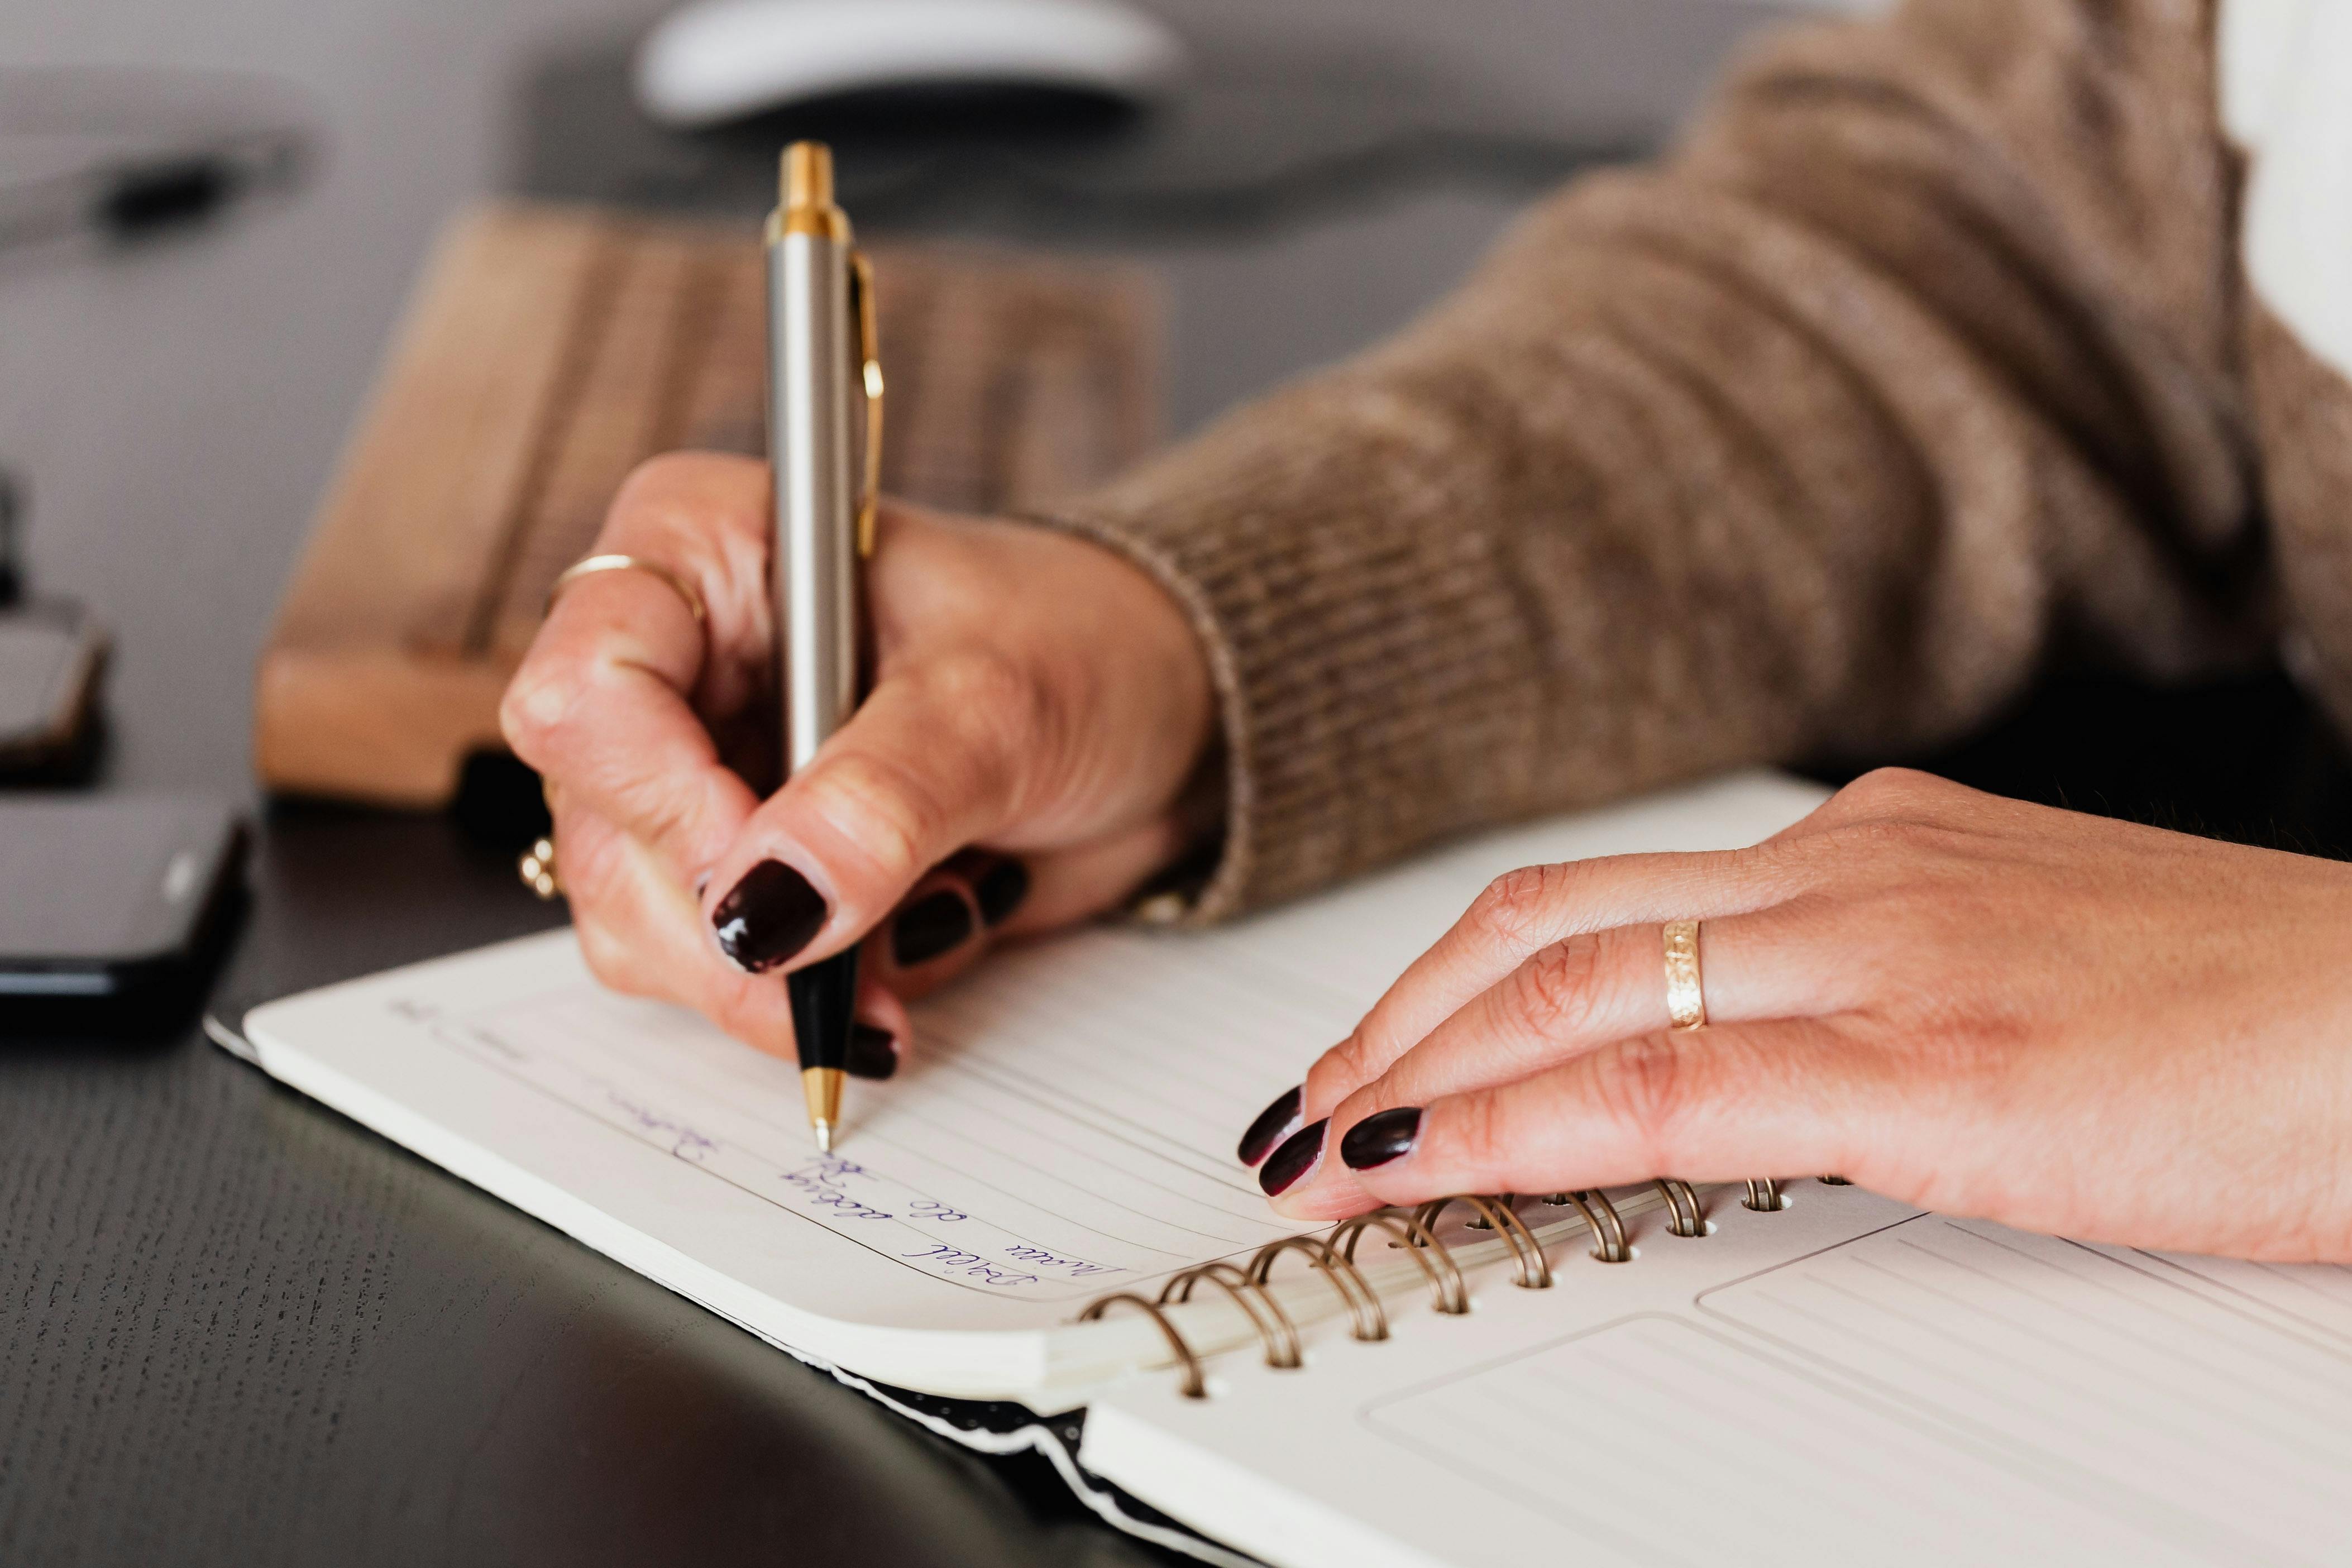 A woman writing in a notepad | Source: Pexels